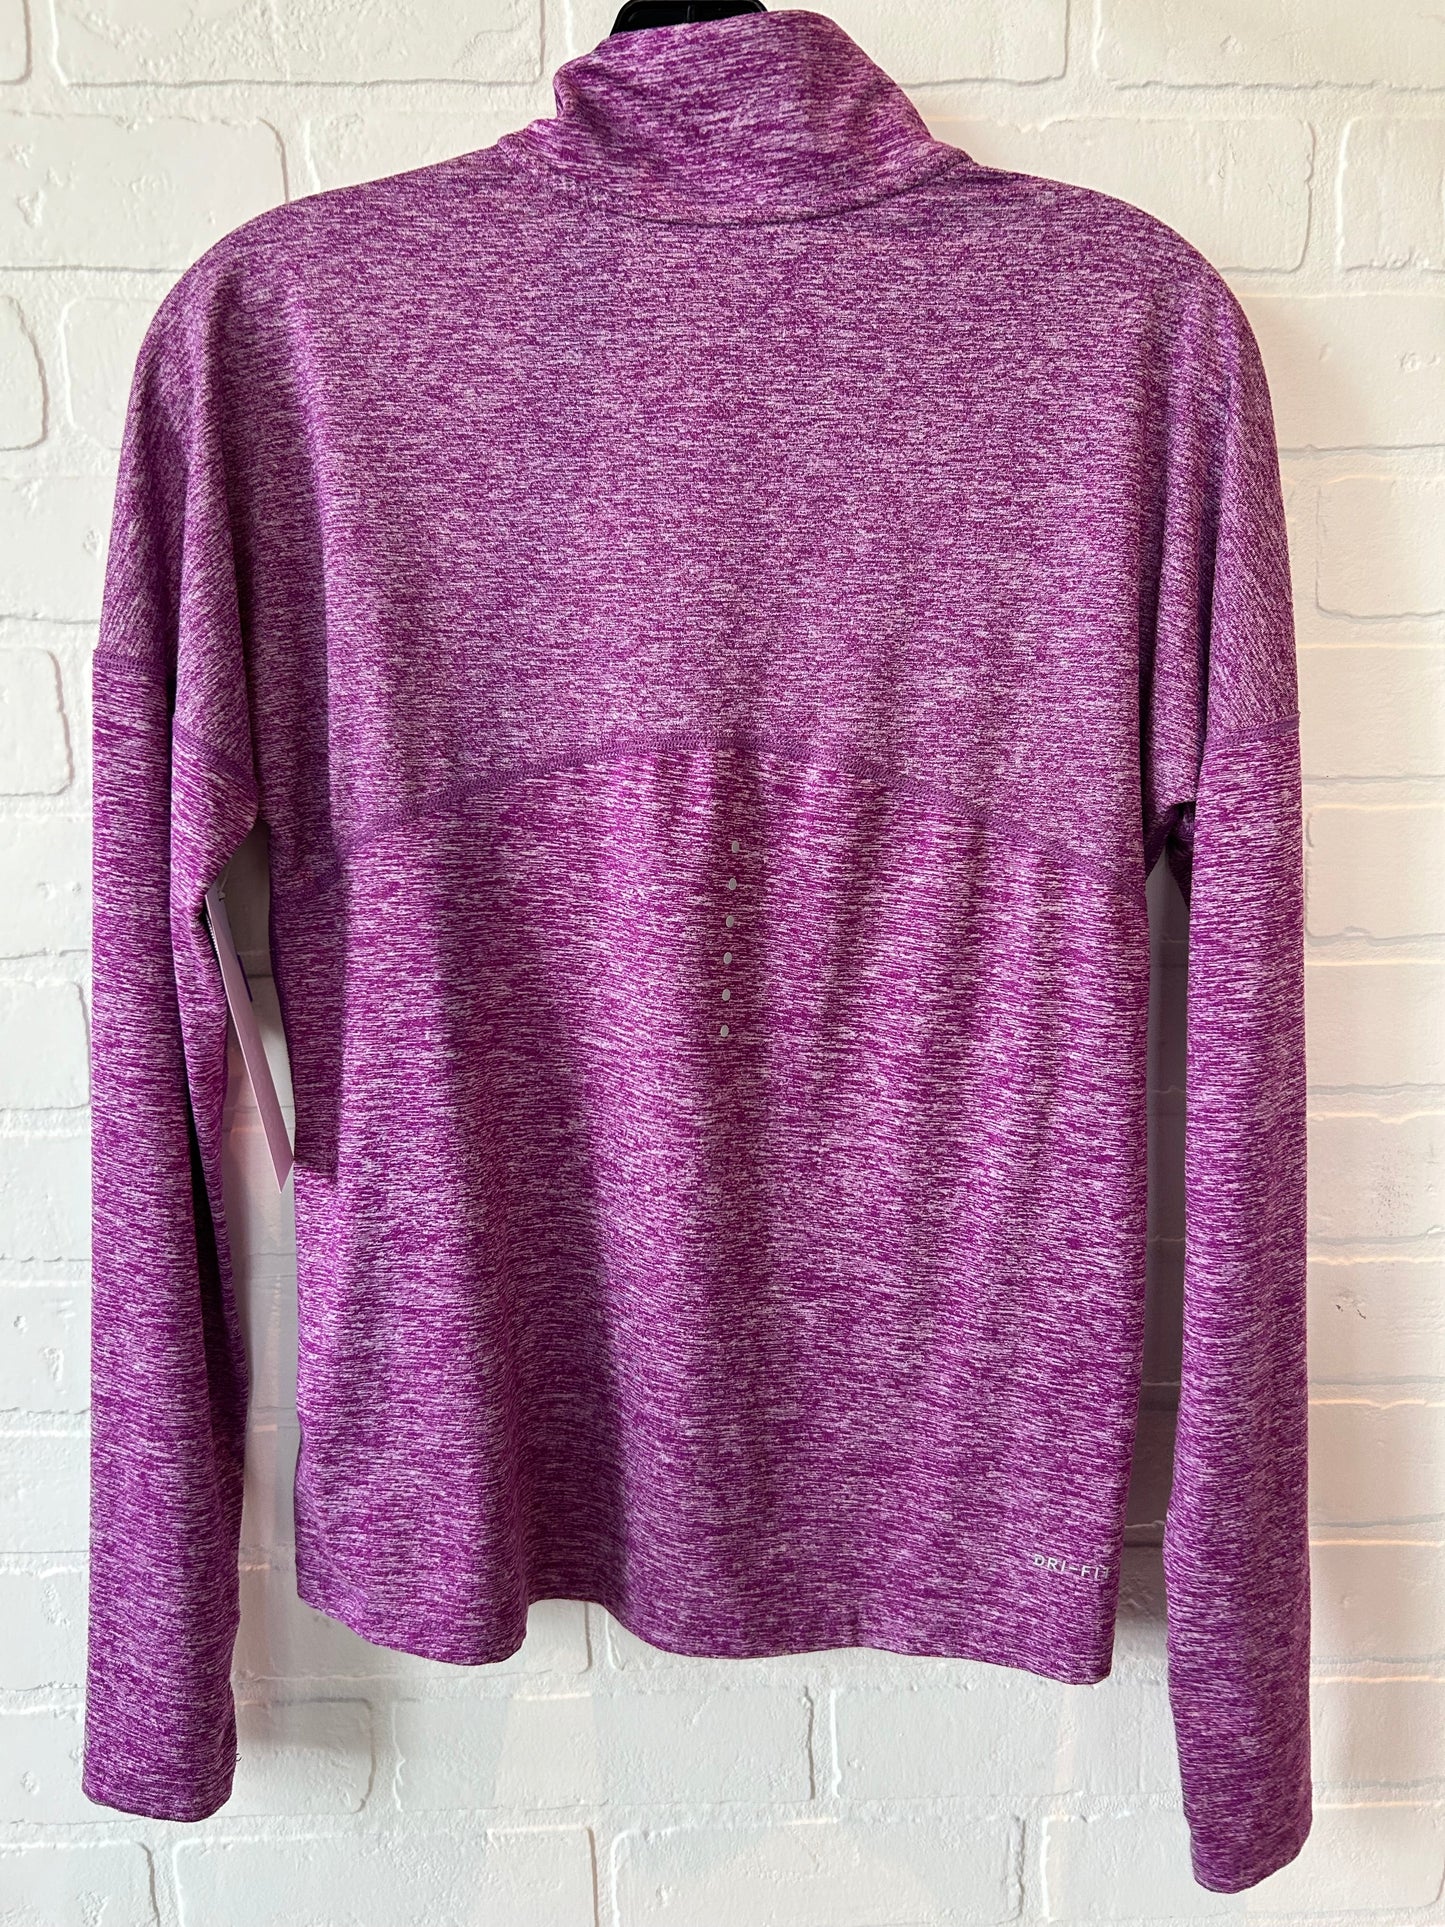 Purple Athletic Top Long Sleeve Collar Nike, Size Xs